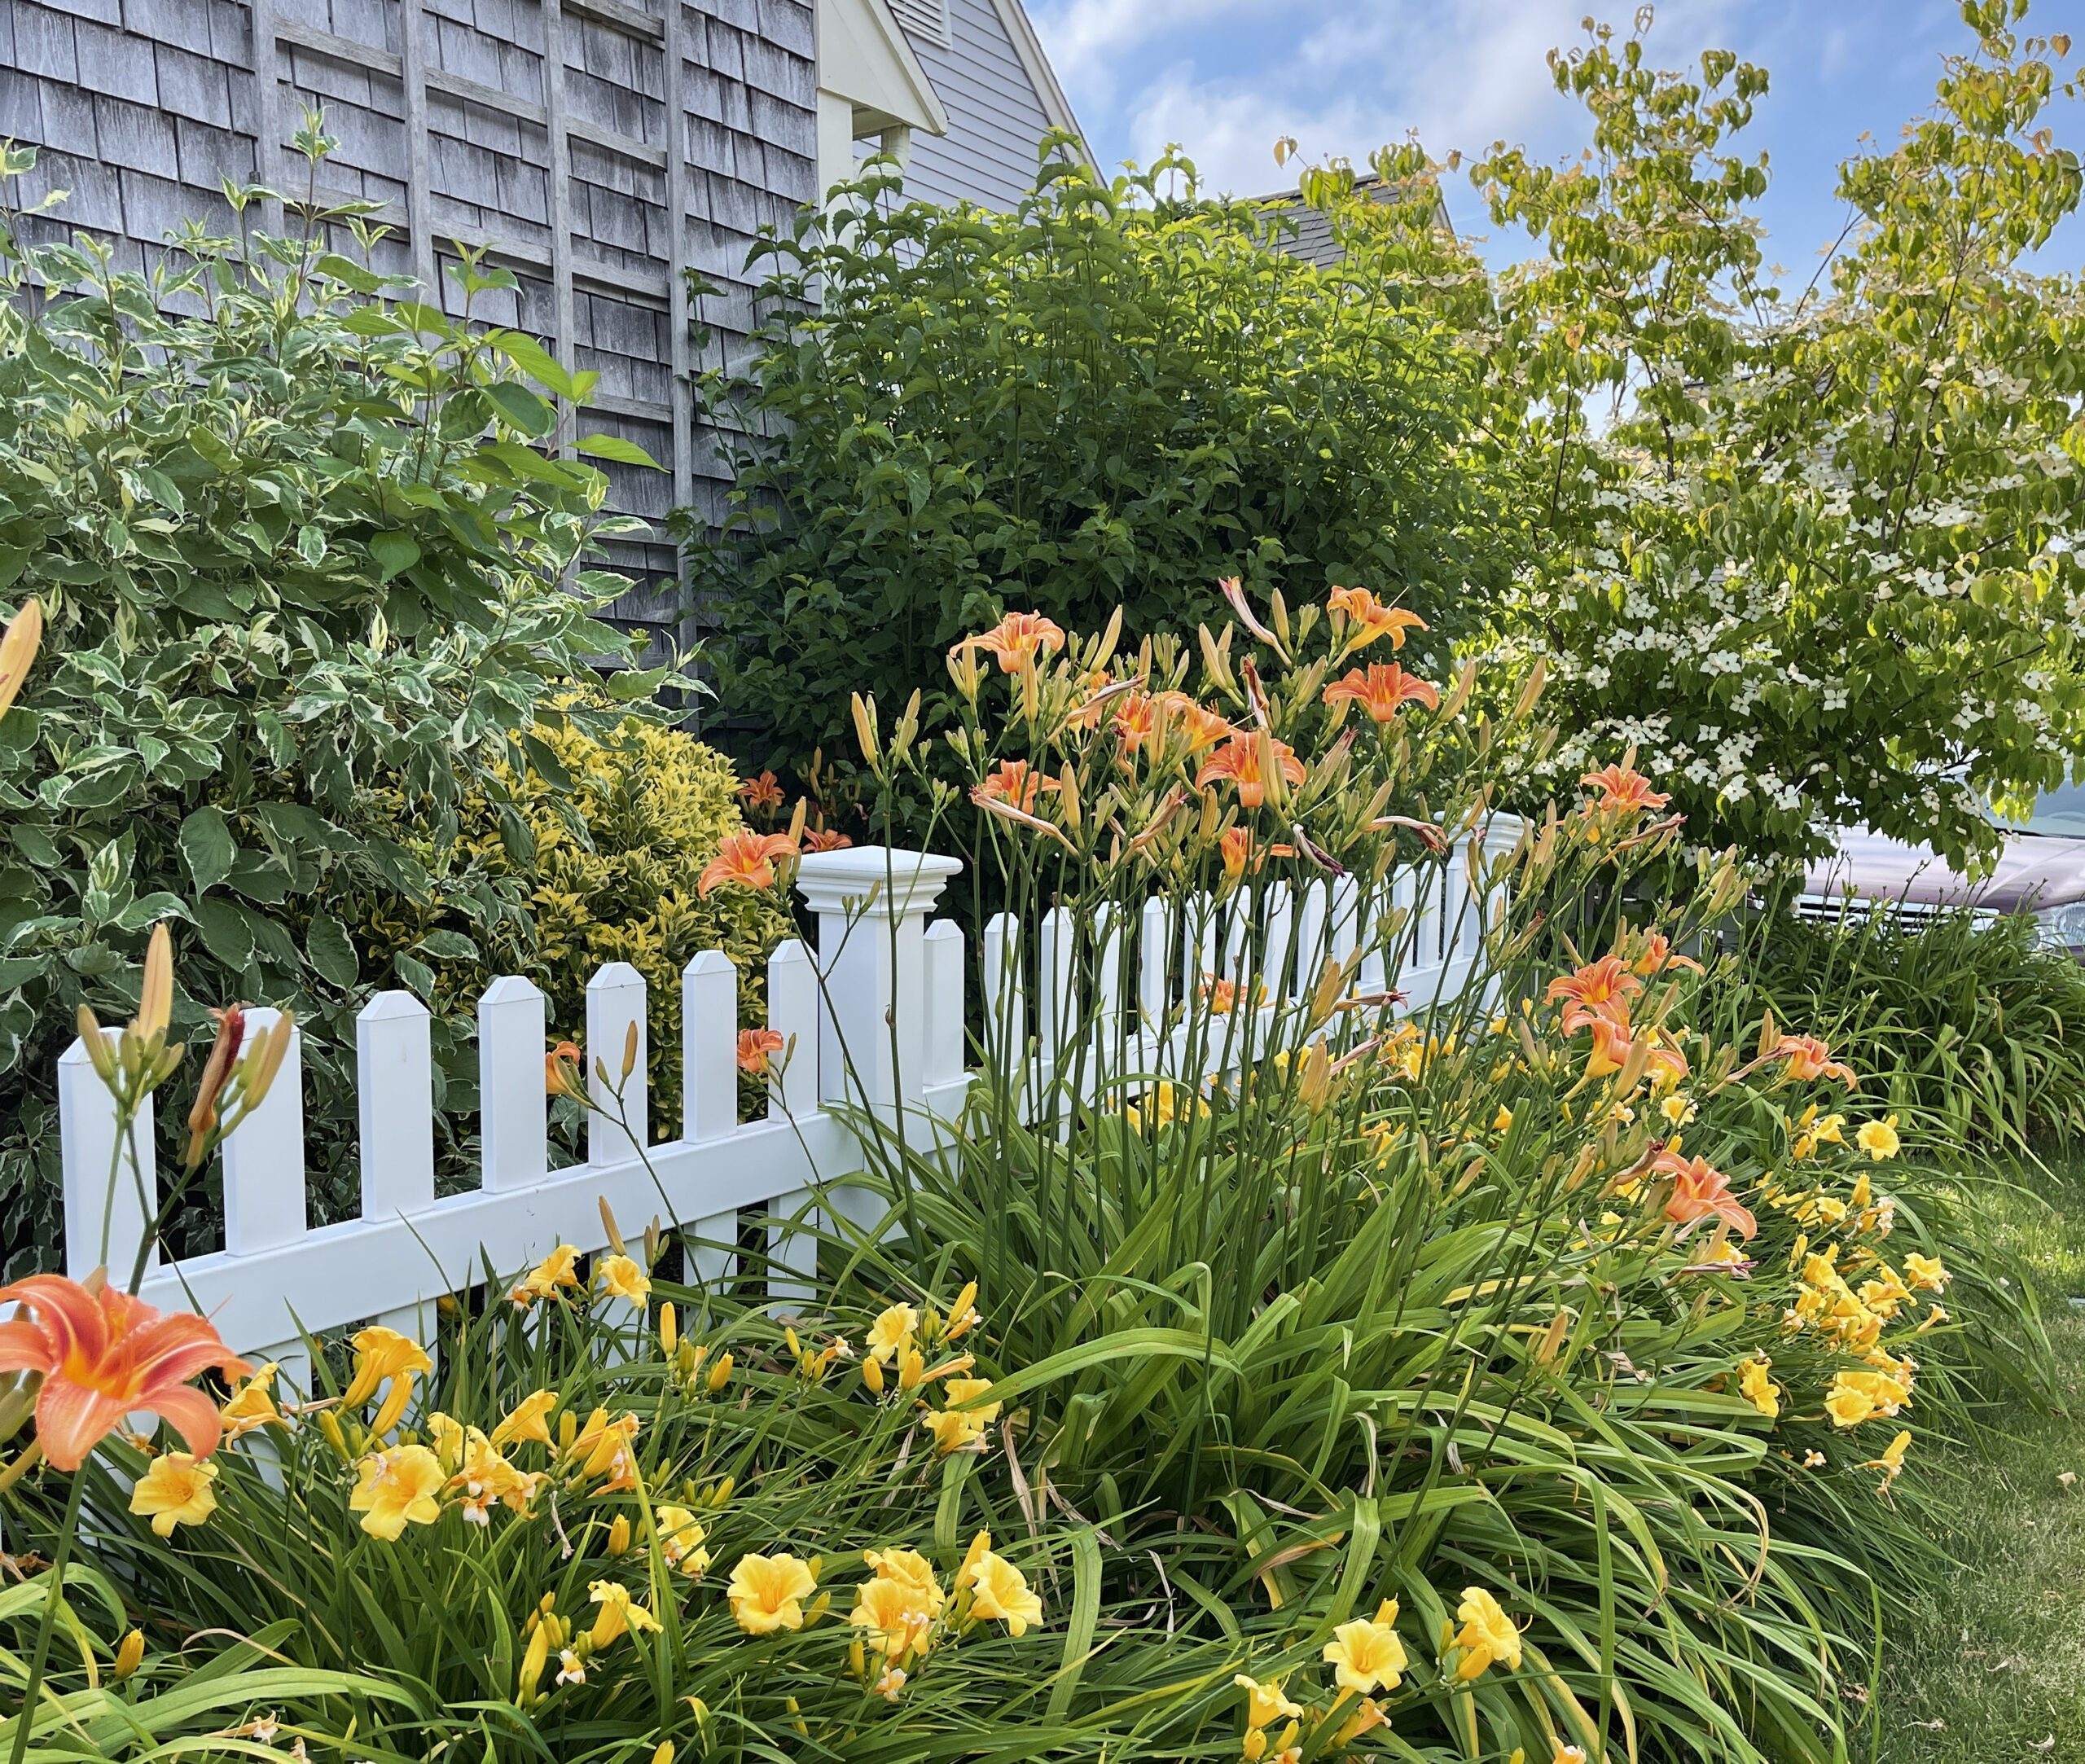 Flower garden and white picket fence of Windchime home